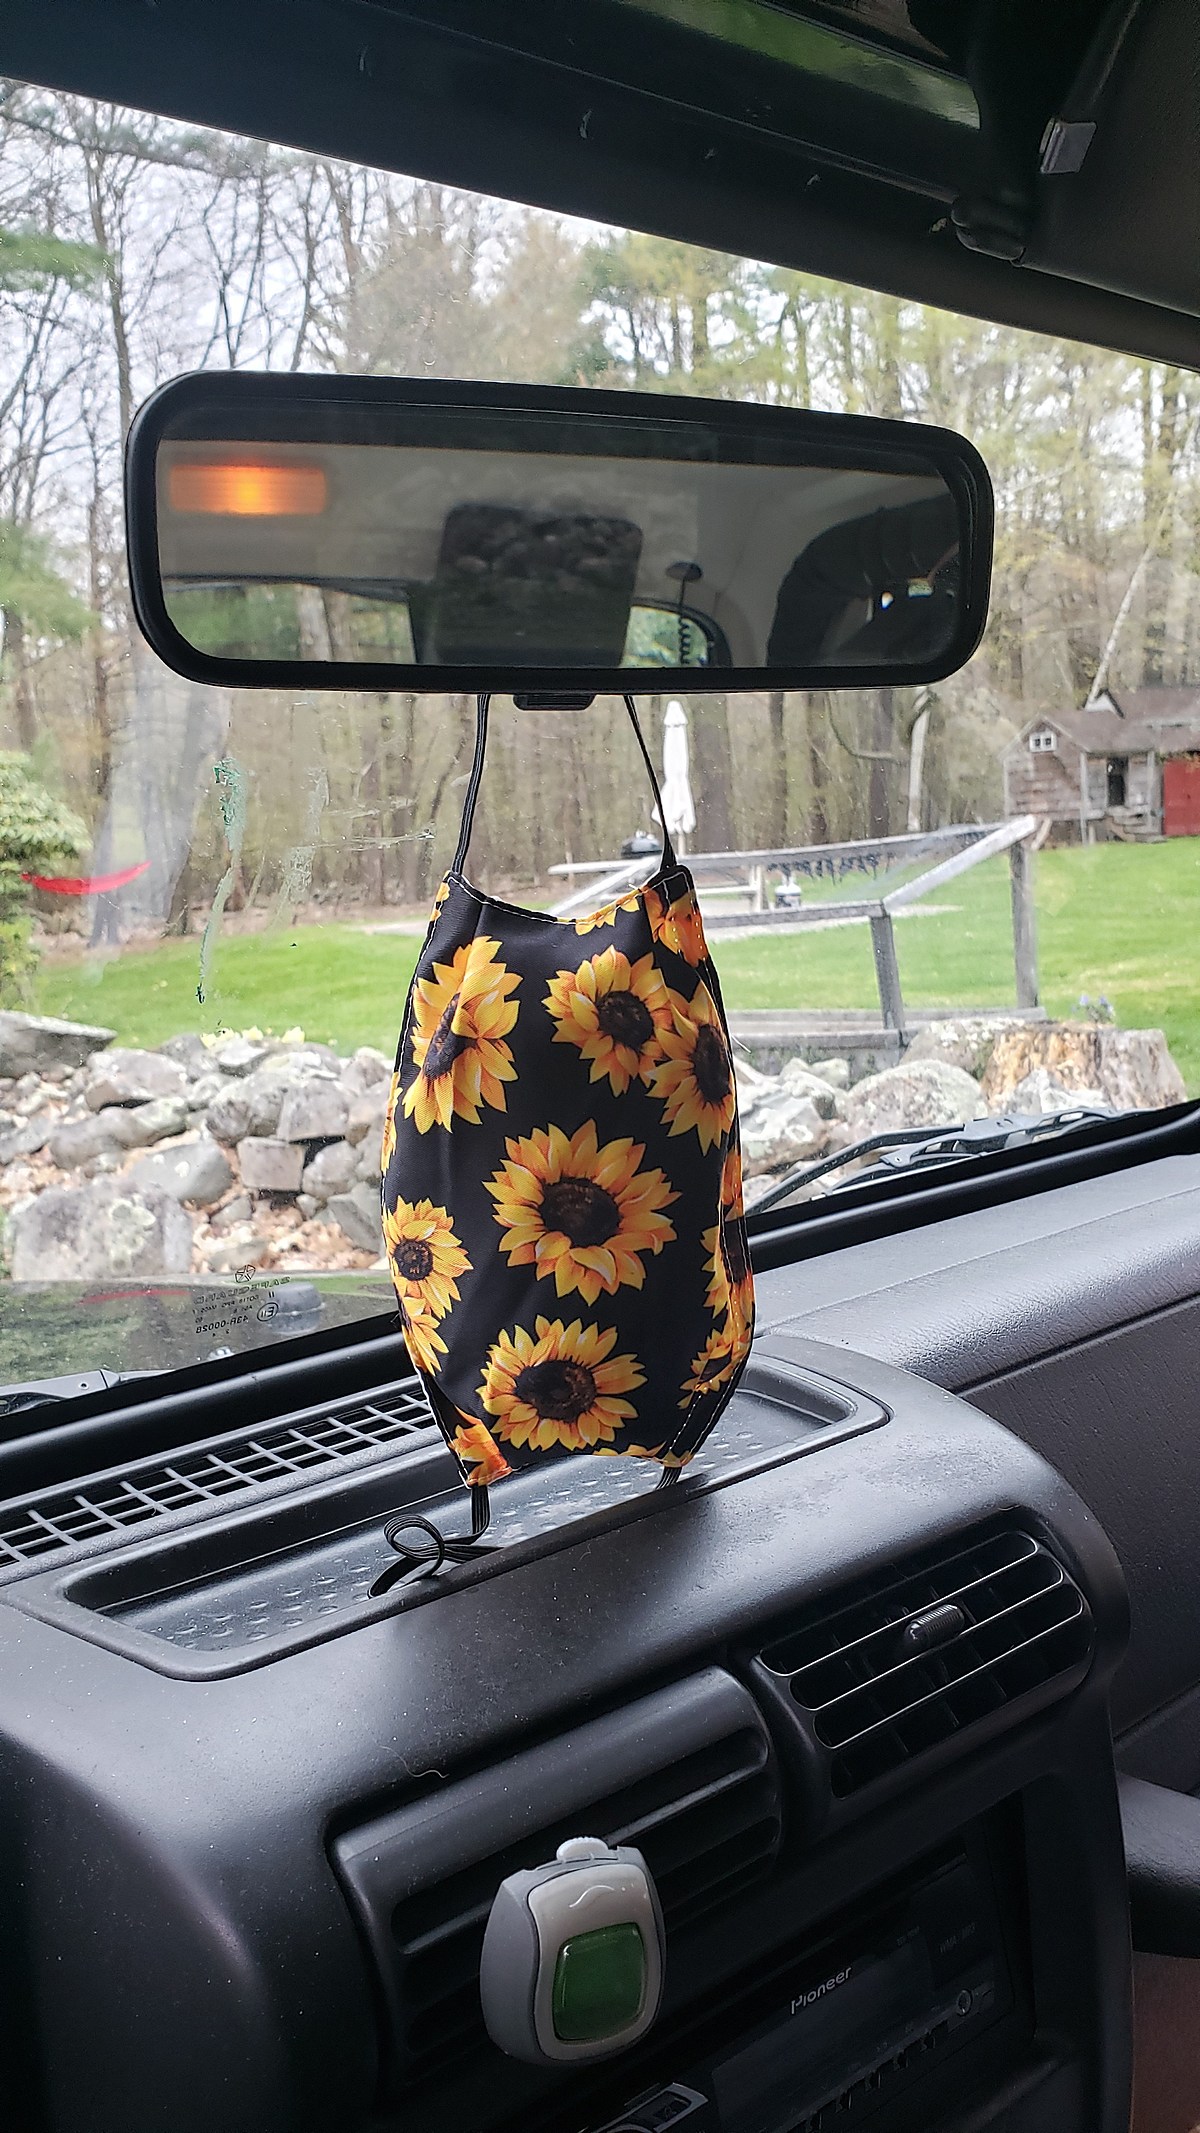 Ask 2: Is it illegal to hang items on your rearview mirror inside your  vehicle?